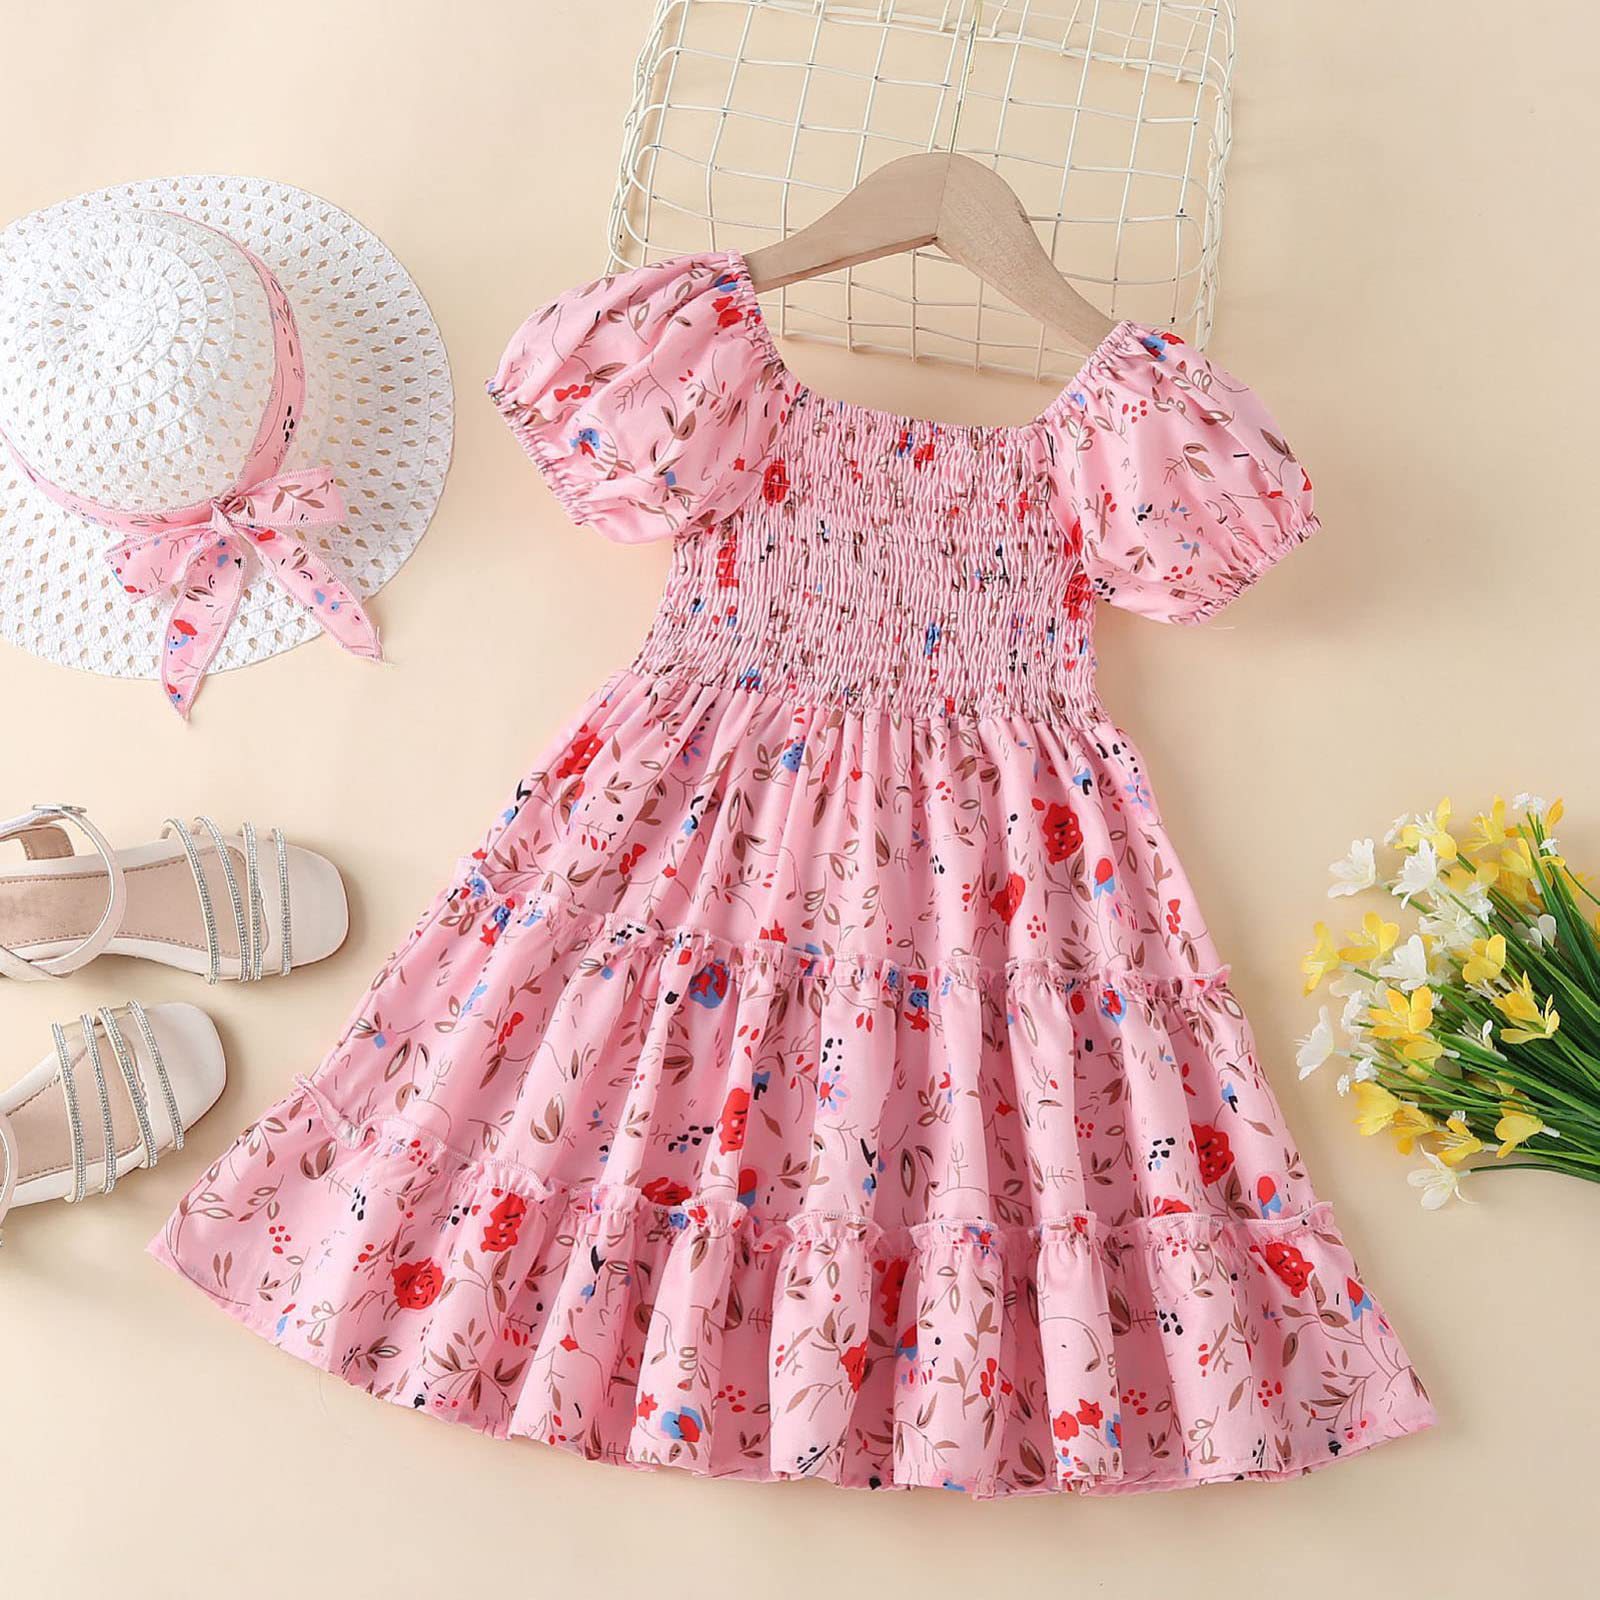 Girls dress with puff sleeves 2023 summe...